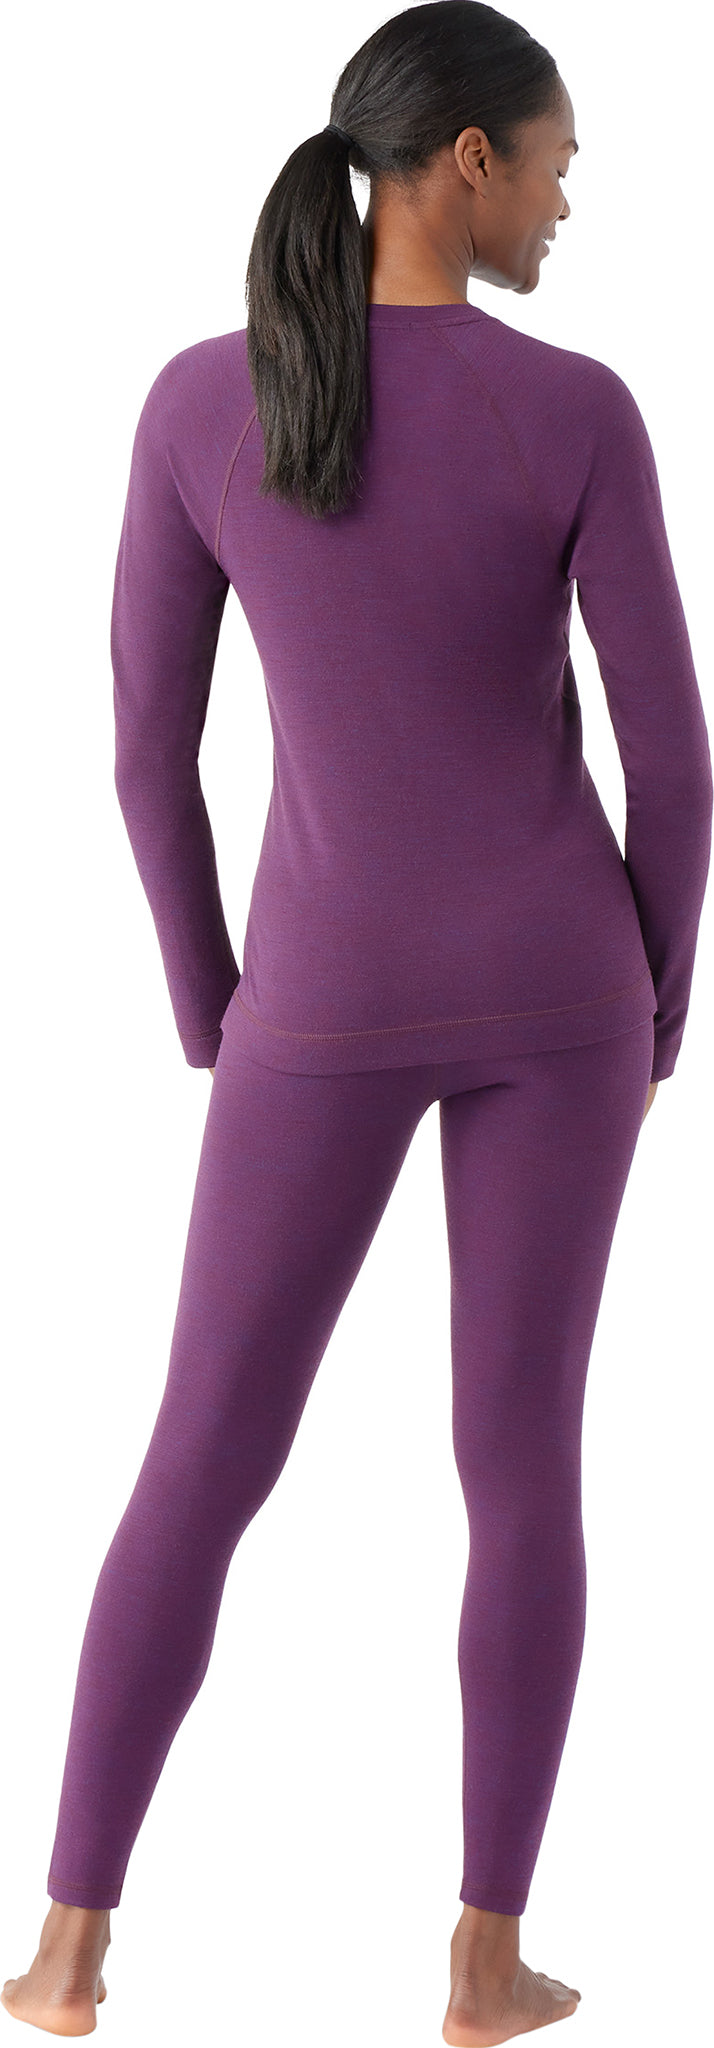 Cuddl Duds Black Women's Active Wear Thermal First Base Layer